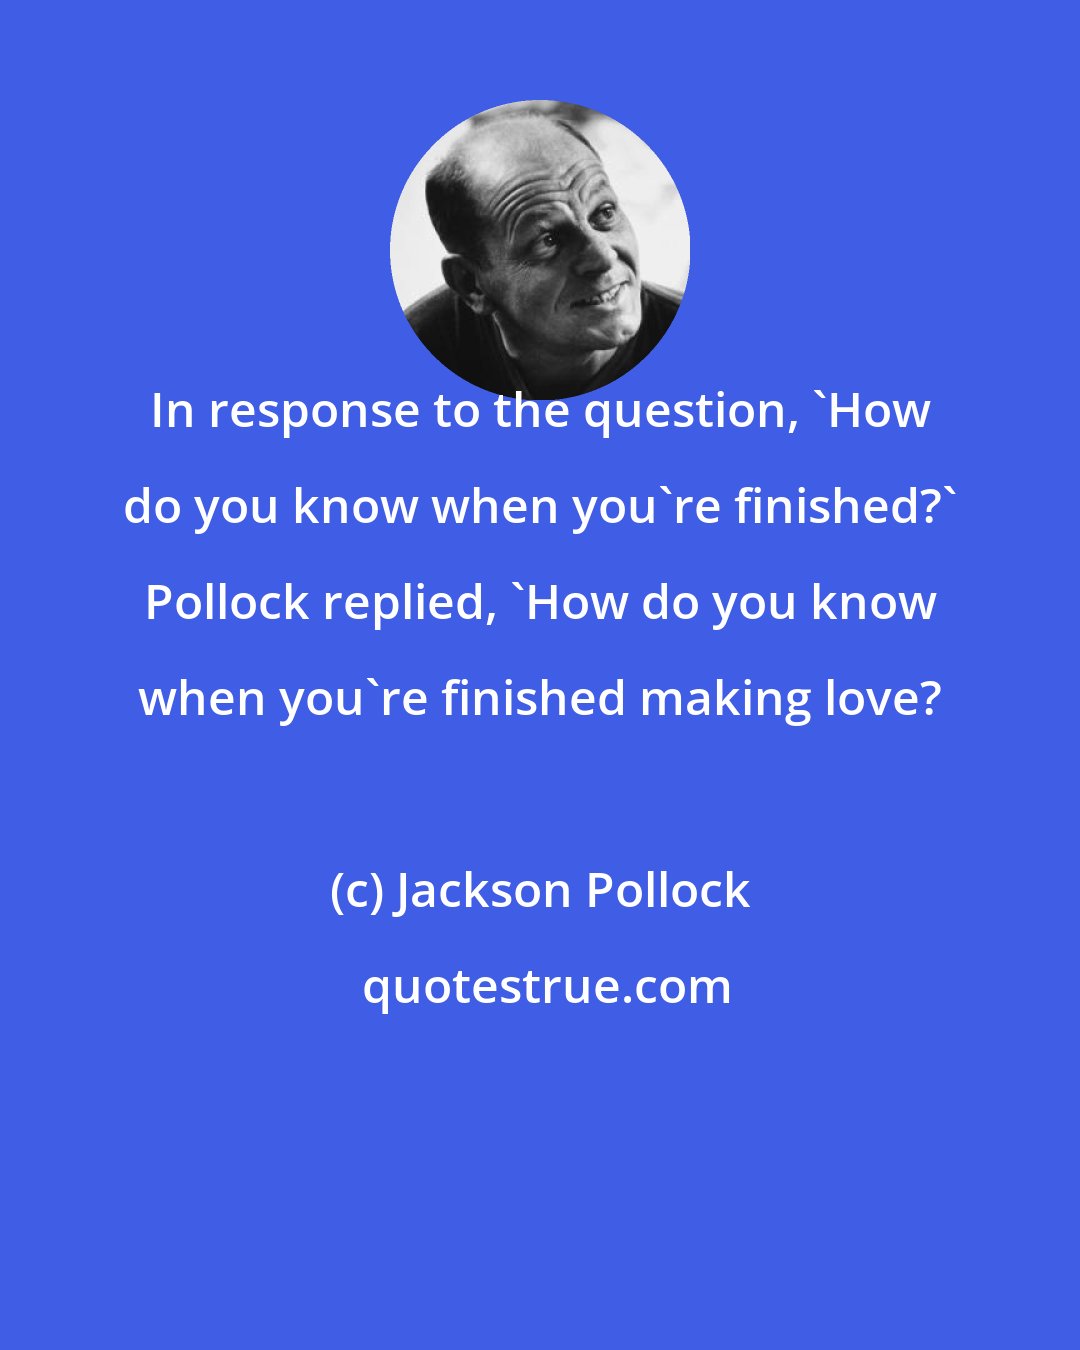 Jackson Pollock: In response to the question, 'How do you know when you're finished?' Pollock replied, 'How do you know when you're finished making love?